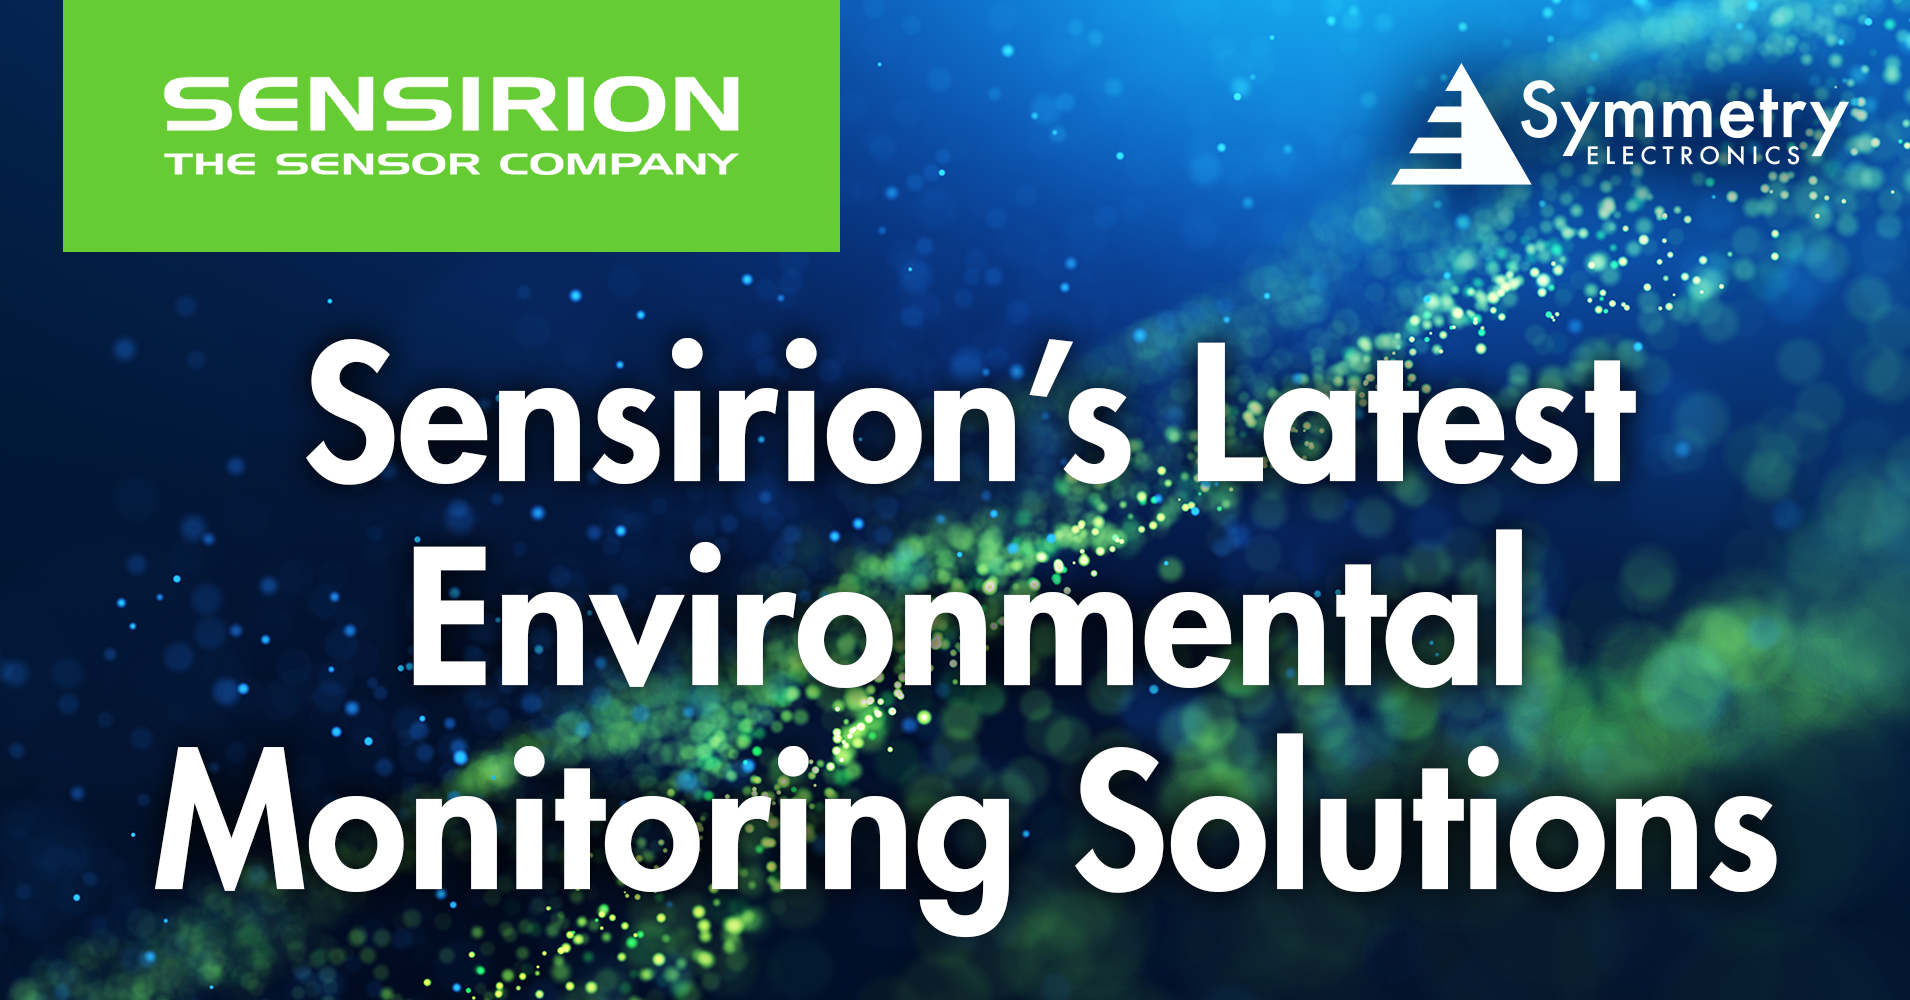 Sensirion's-Latest-Environmental-Monitoring-Solutions-Are-Available-At-Symmetry-Electronics